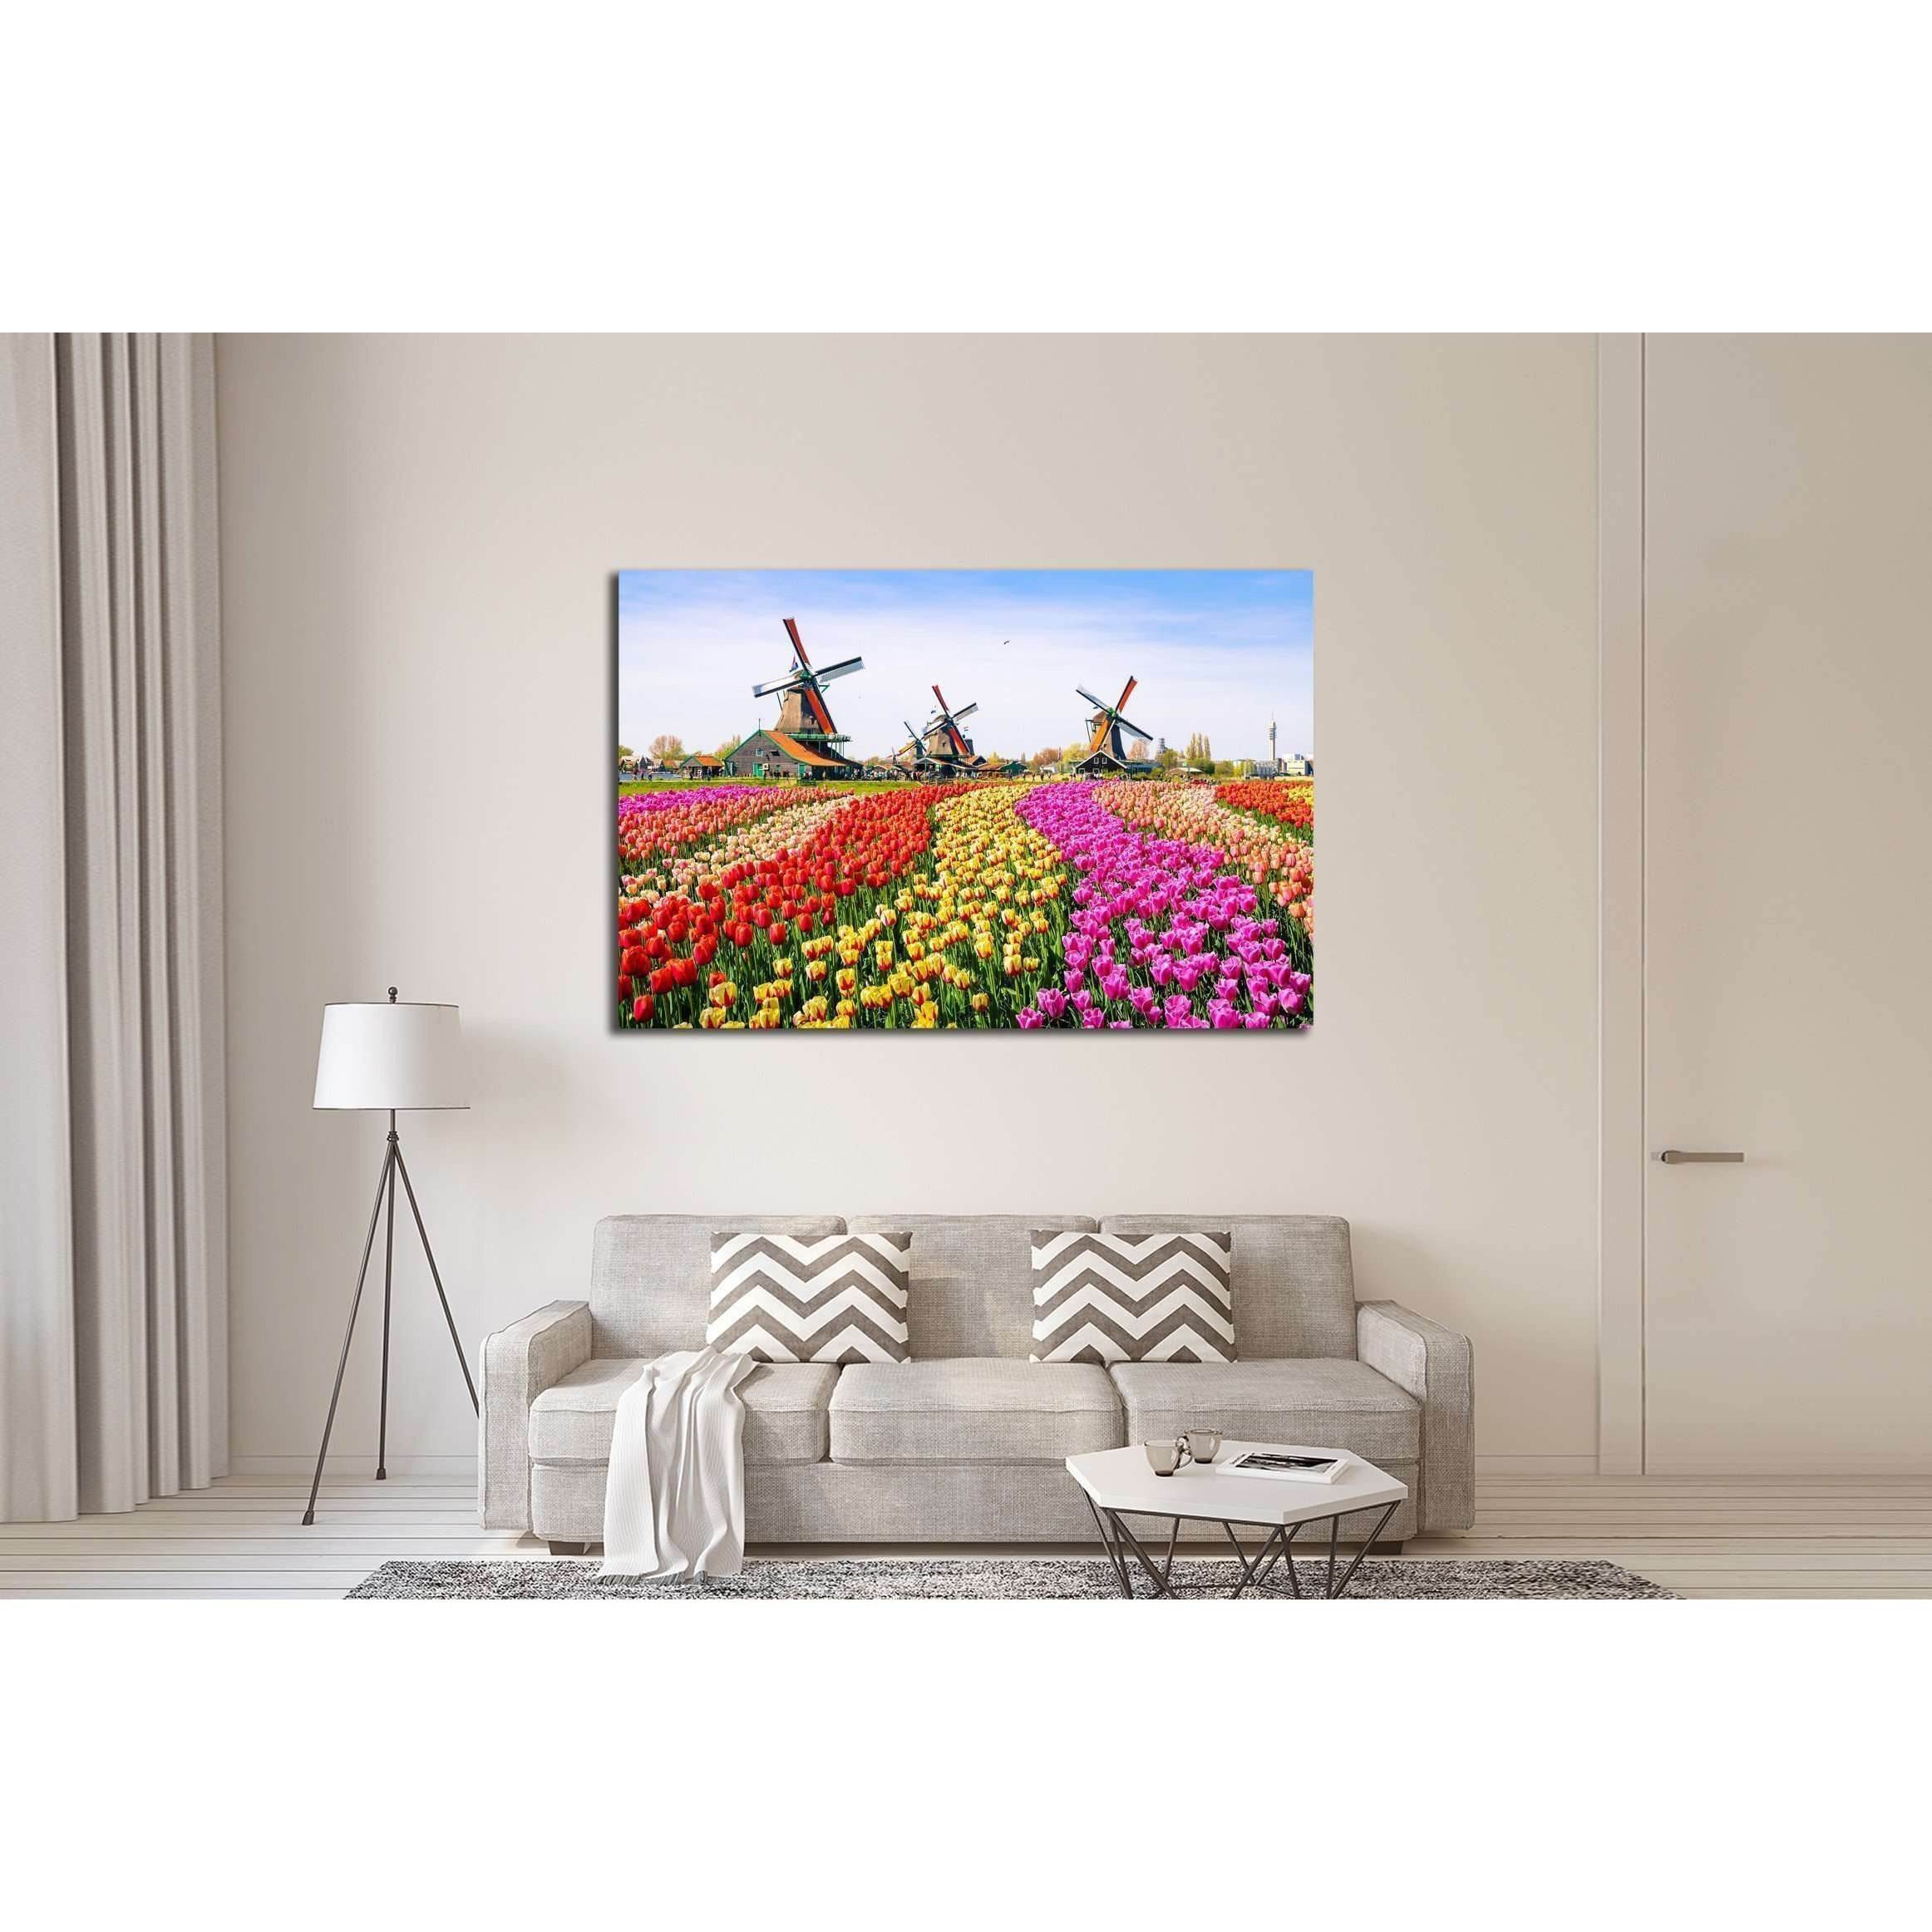 Landscape with tulips, traditional dutch windmills and houses near the canal in Zaanse Schans, Netherlands, Europe №2320 Ready to Hang Canvas Print